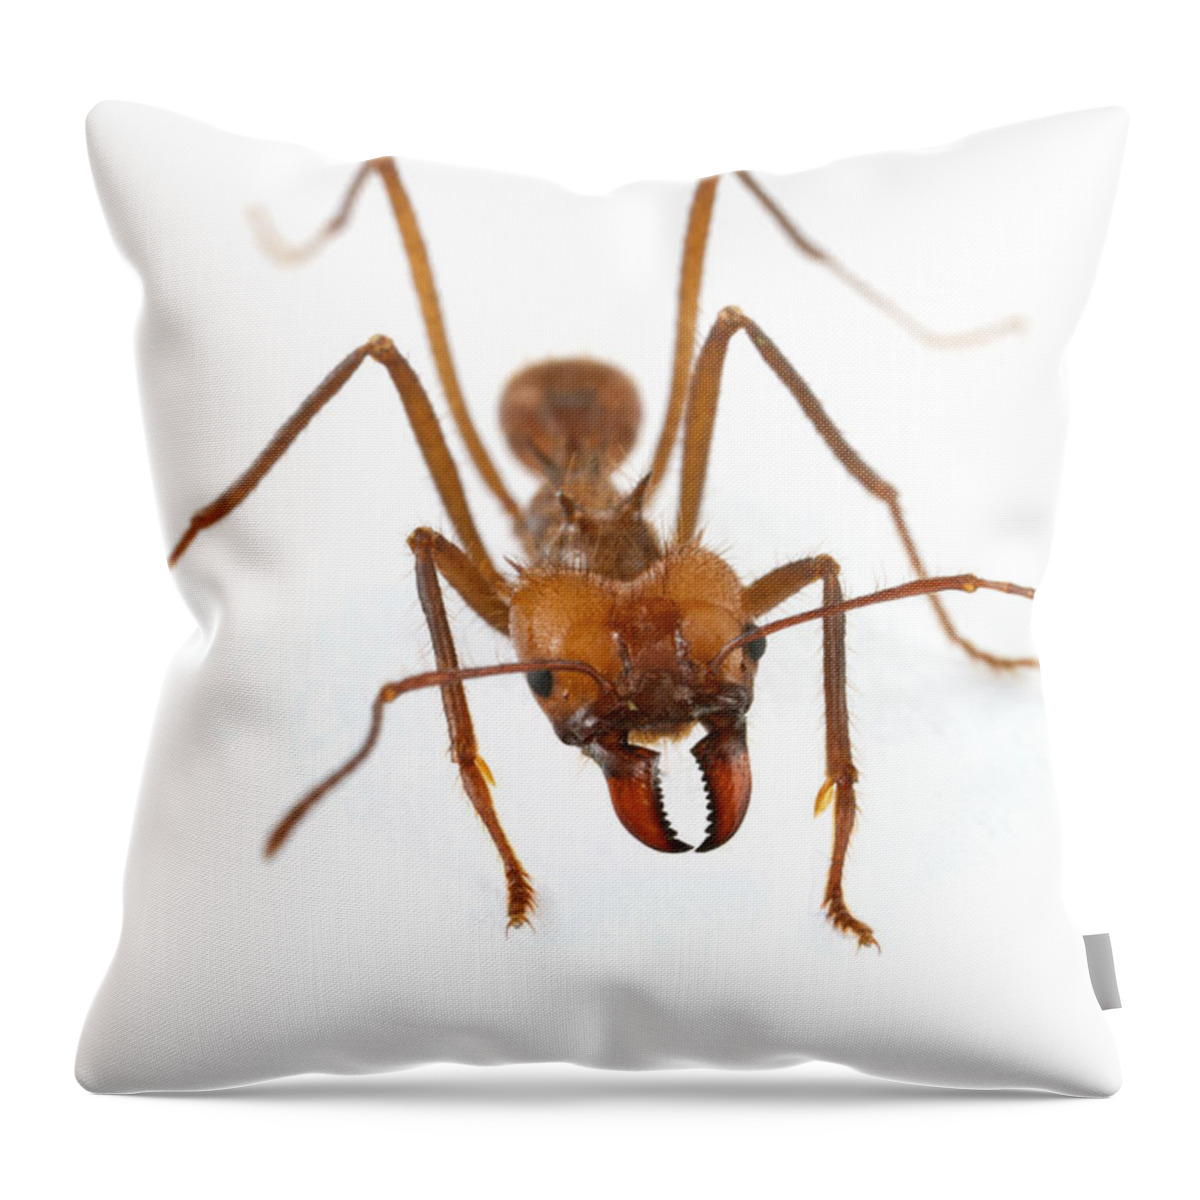 00478940 Throw Pillow featuring the photograph Leafcutter Ant Worker Costa Rica by Piotr Naskrecki